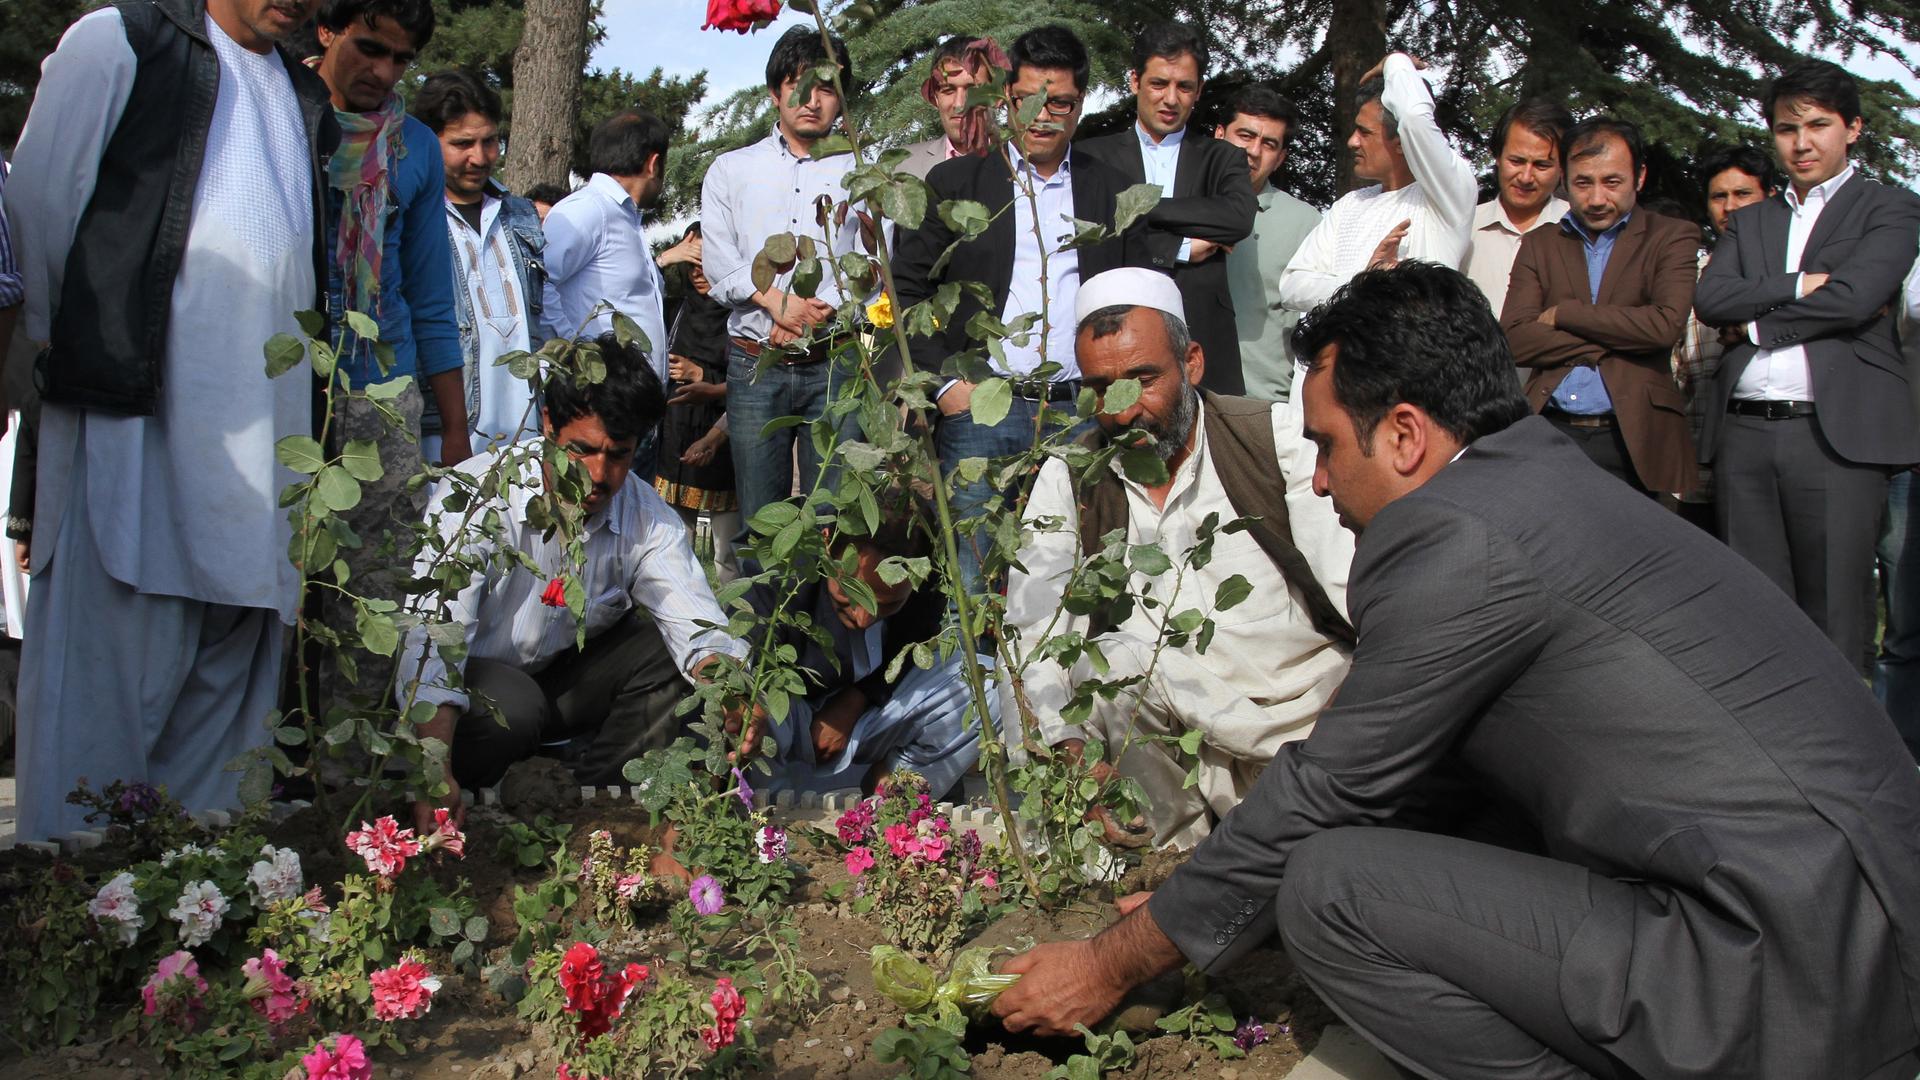 A group of men gather around a memorial to plant flowers for victims of a militant attack.